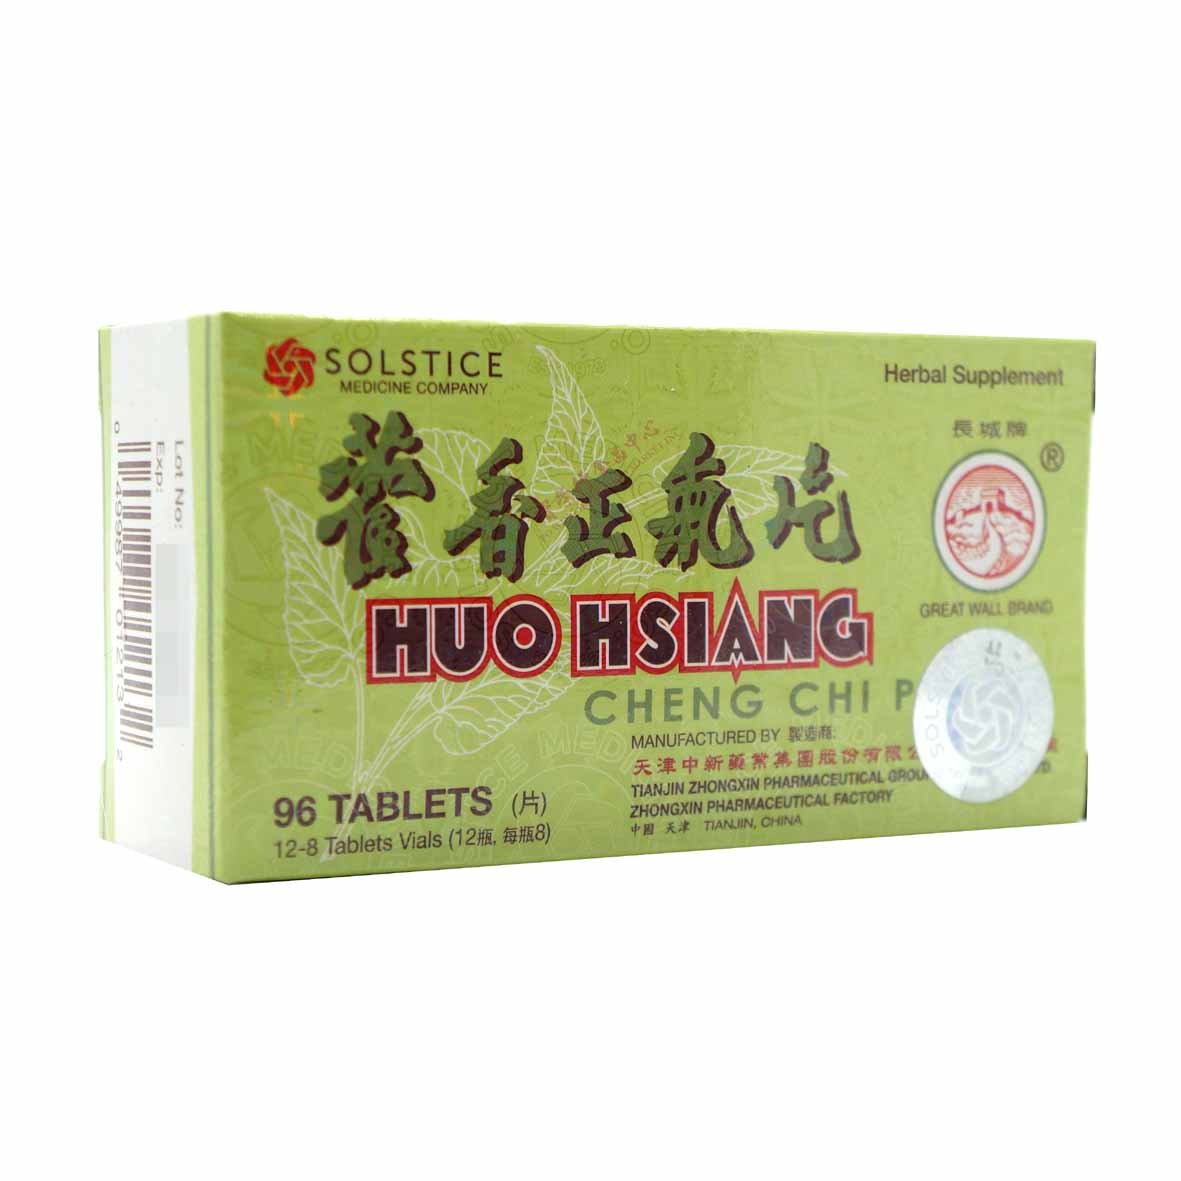 Huo Hsiang Cheng Chi Pien | Po Wing Online